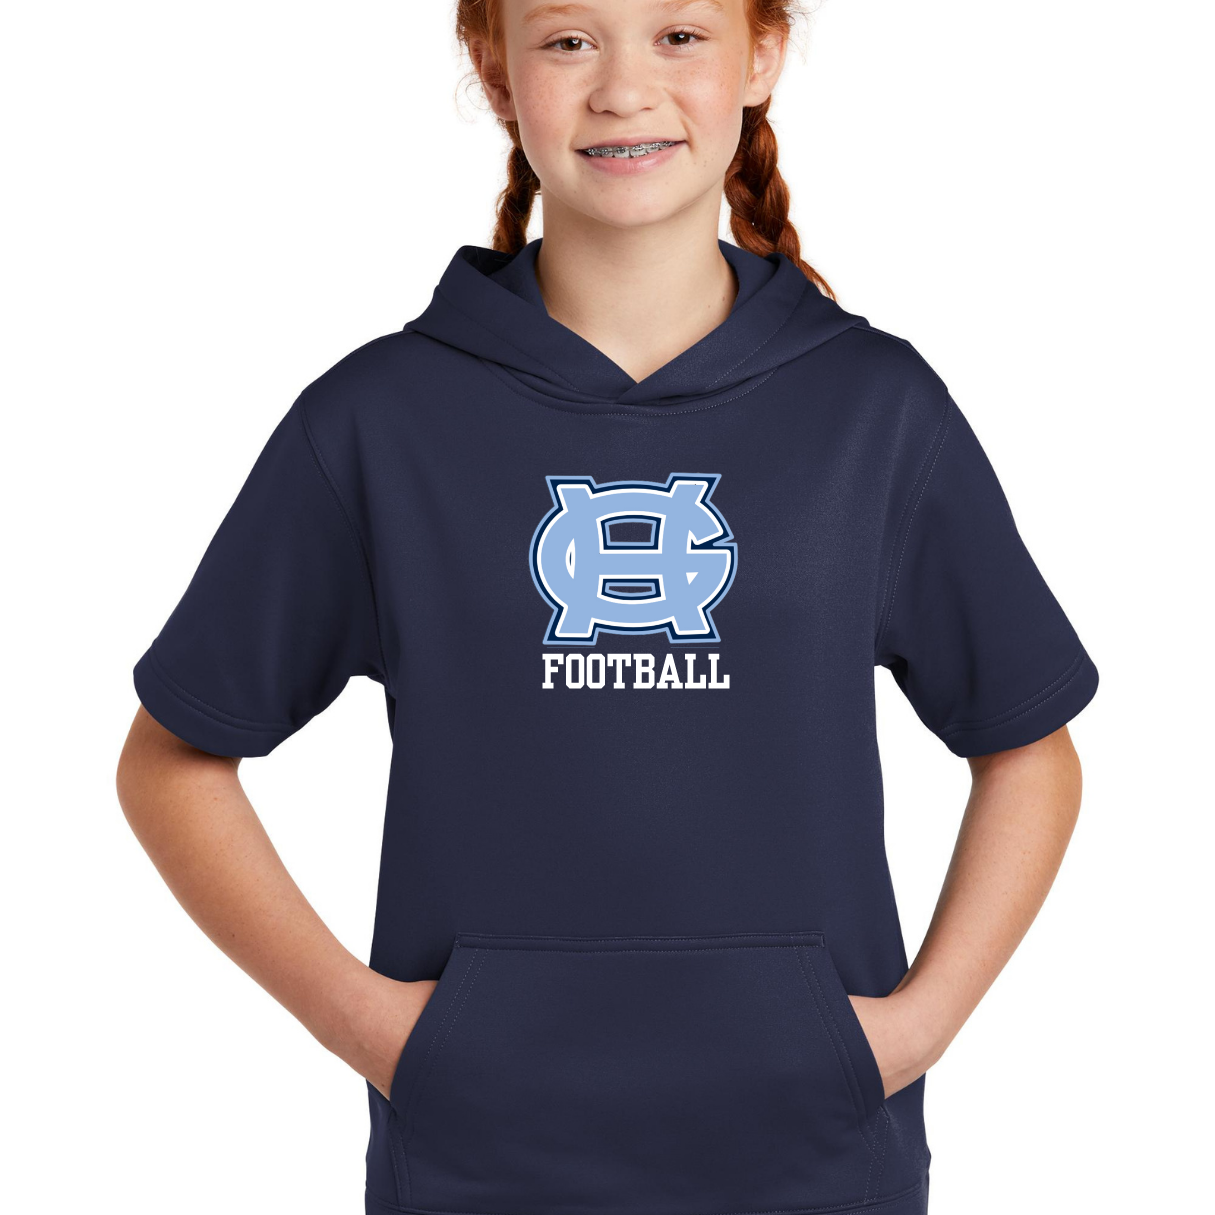 Classic GH Football Short Sleeved Performance Hooded Sweatshirt- Adult and Youth